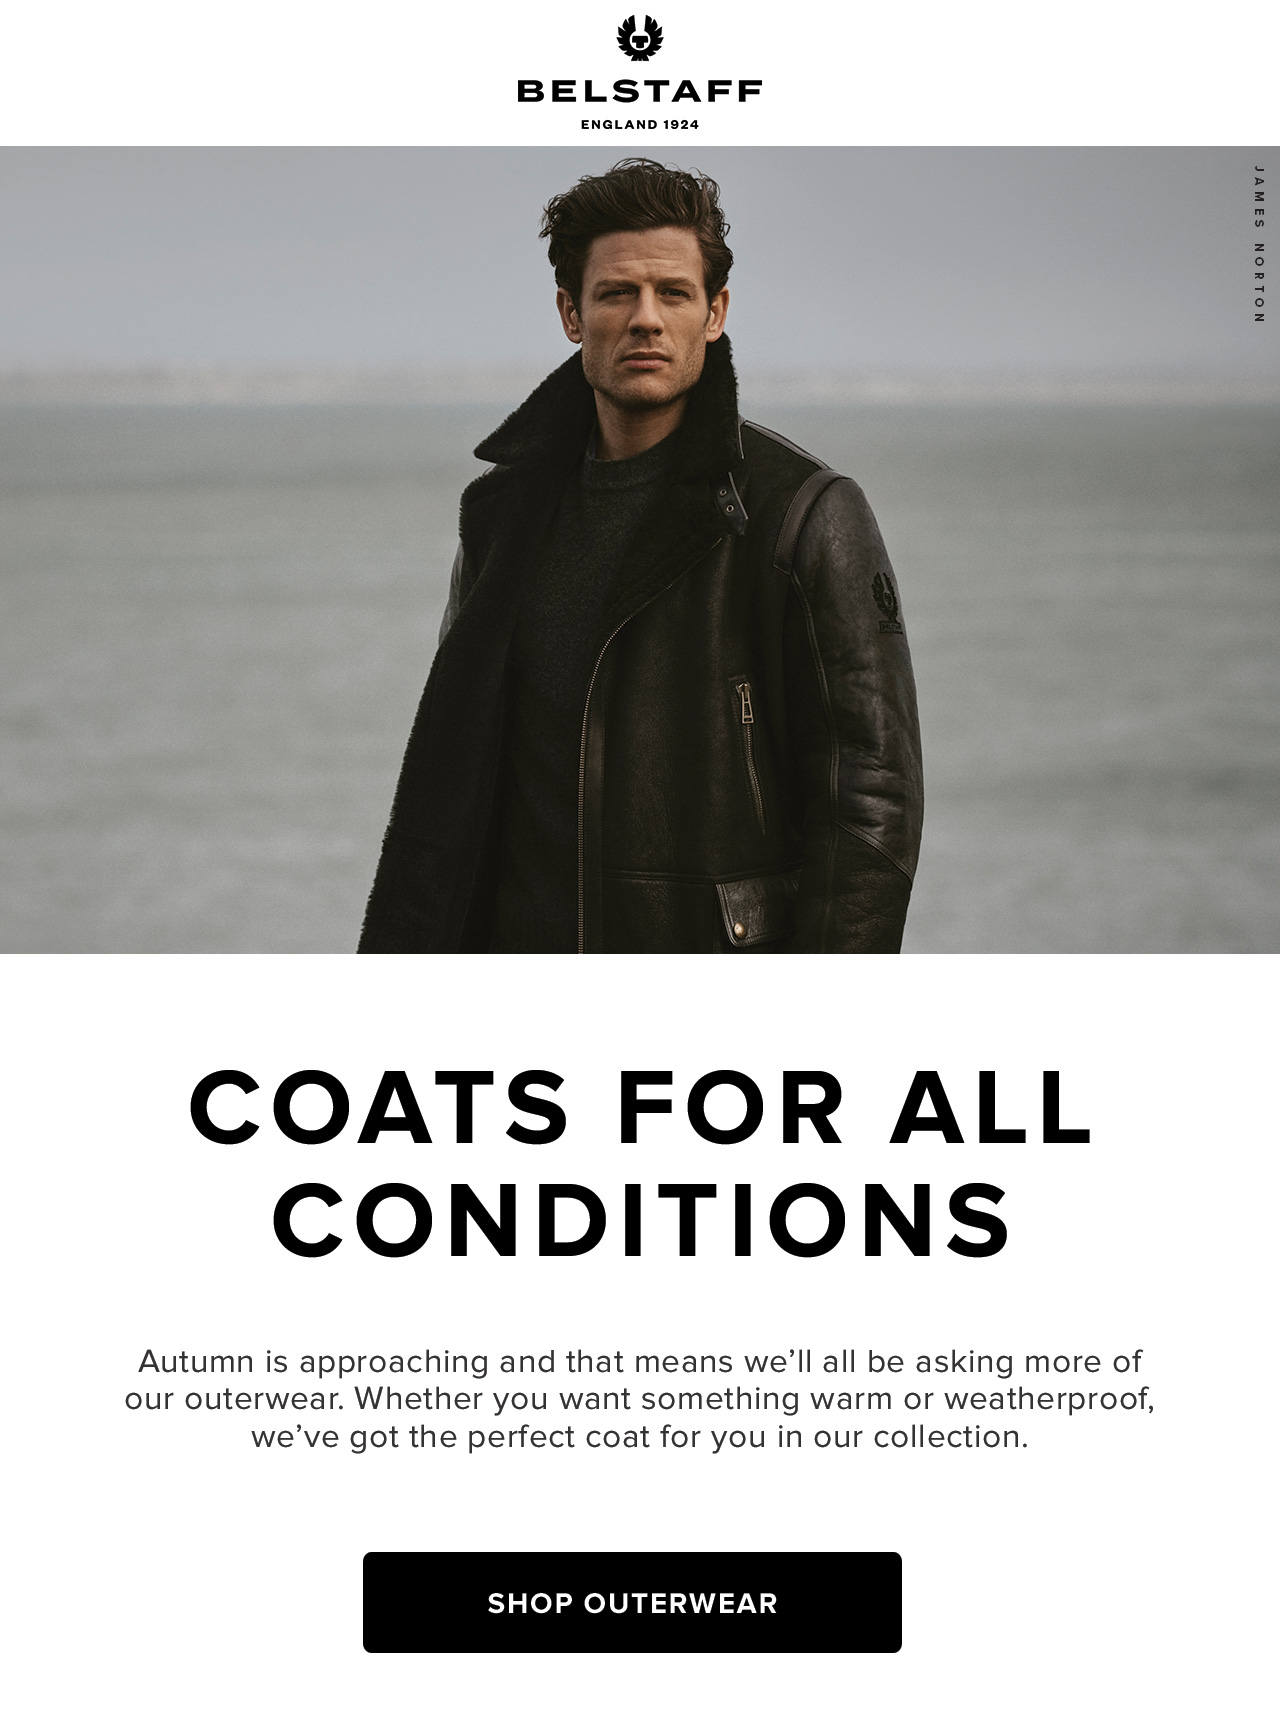 Autumn is approaching and that means we'll all be asking more of our outerwear. Whether you want something warm or weatherproof, we've got the perfect coat for you in our collection.	